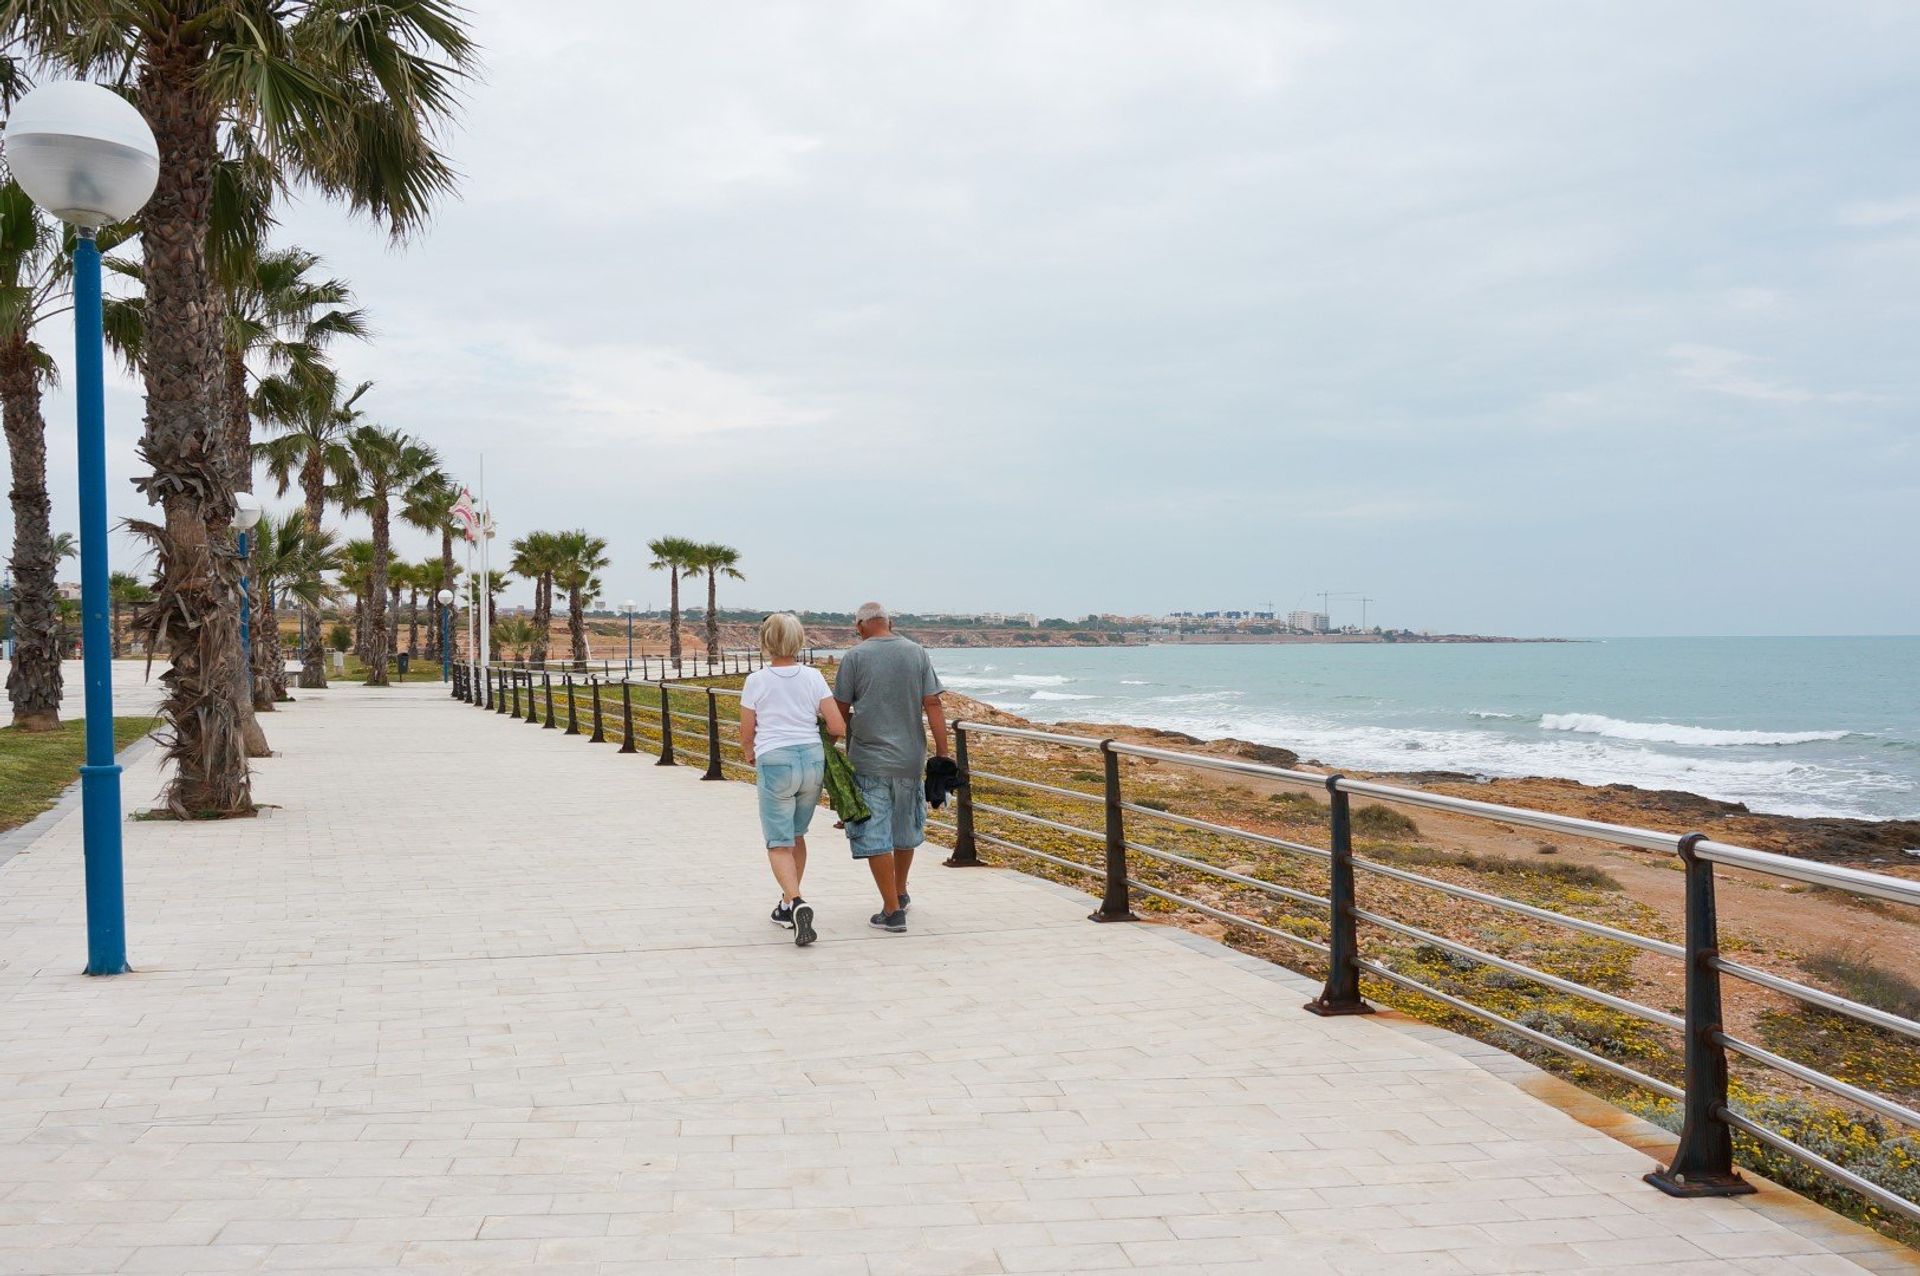 Enjoy a relaxing stroll down the beach promenade with a beautiful backdrop of the sparkling Mediterranean